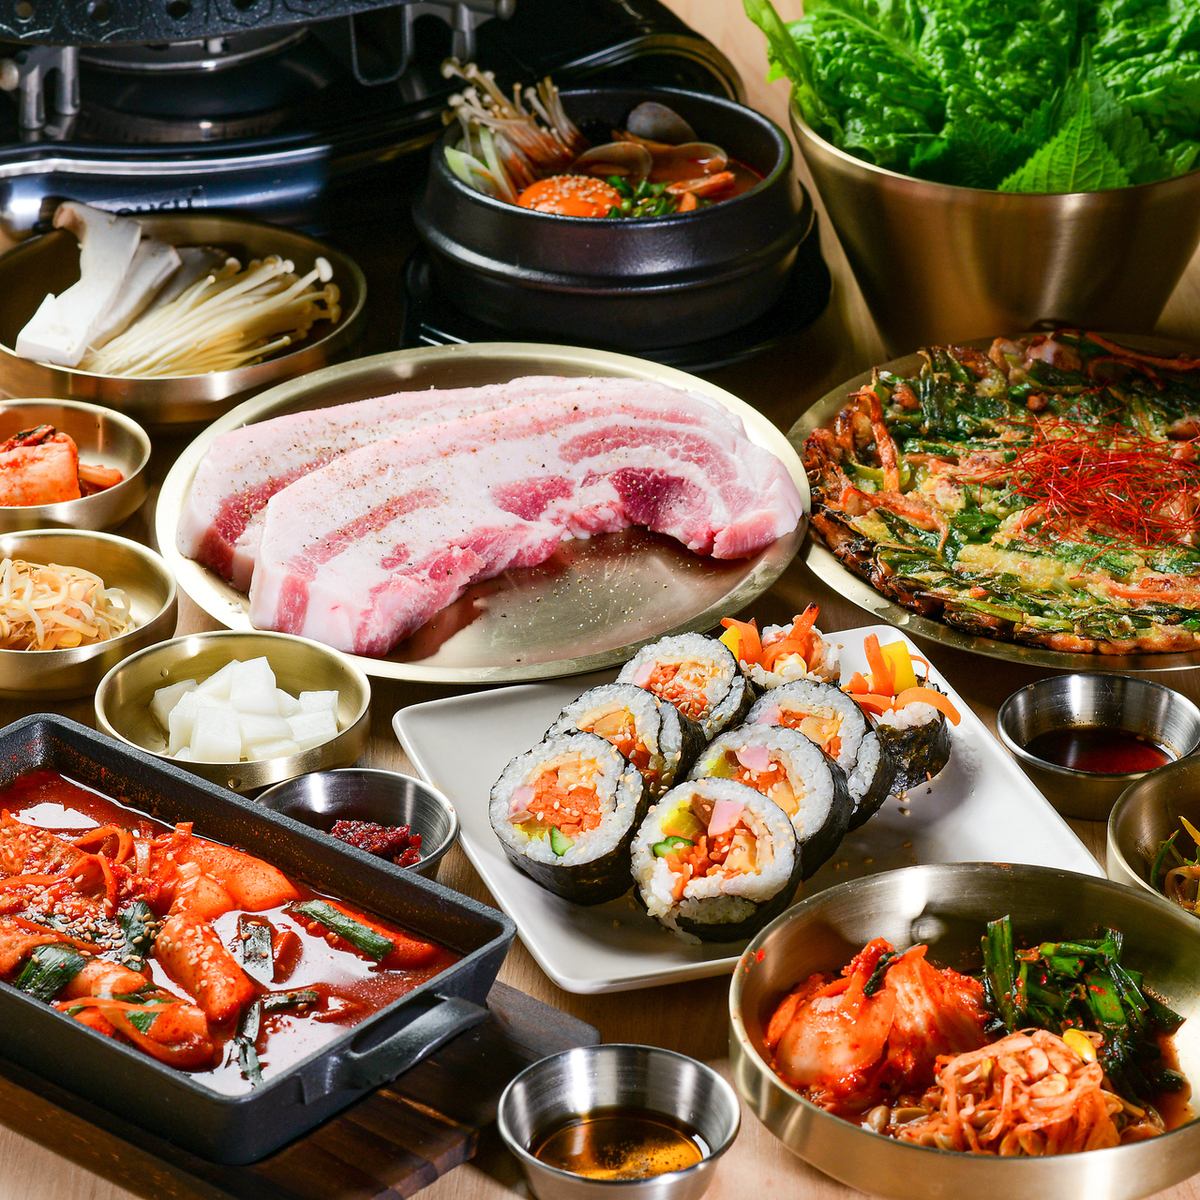 You can enjoy a wide variety of Korean cuisine in a calm space! Please come with your spouse, family, etc.!